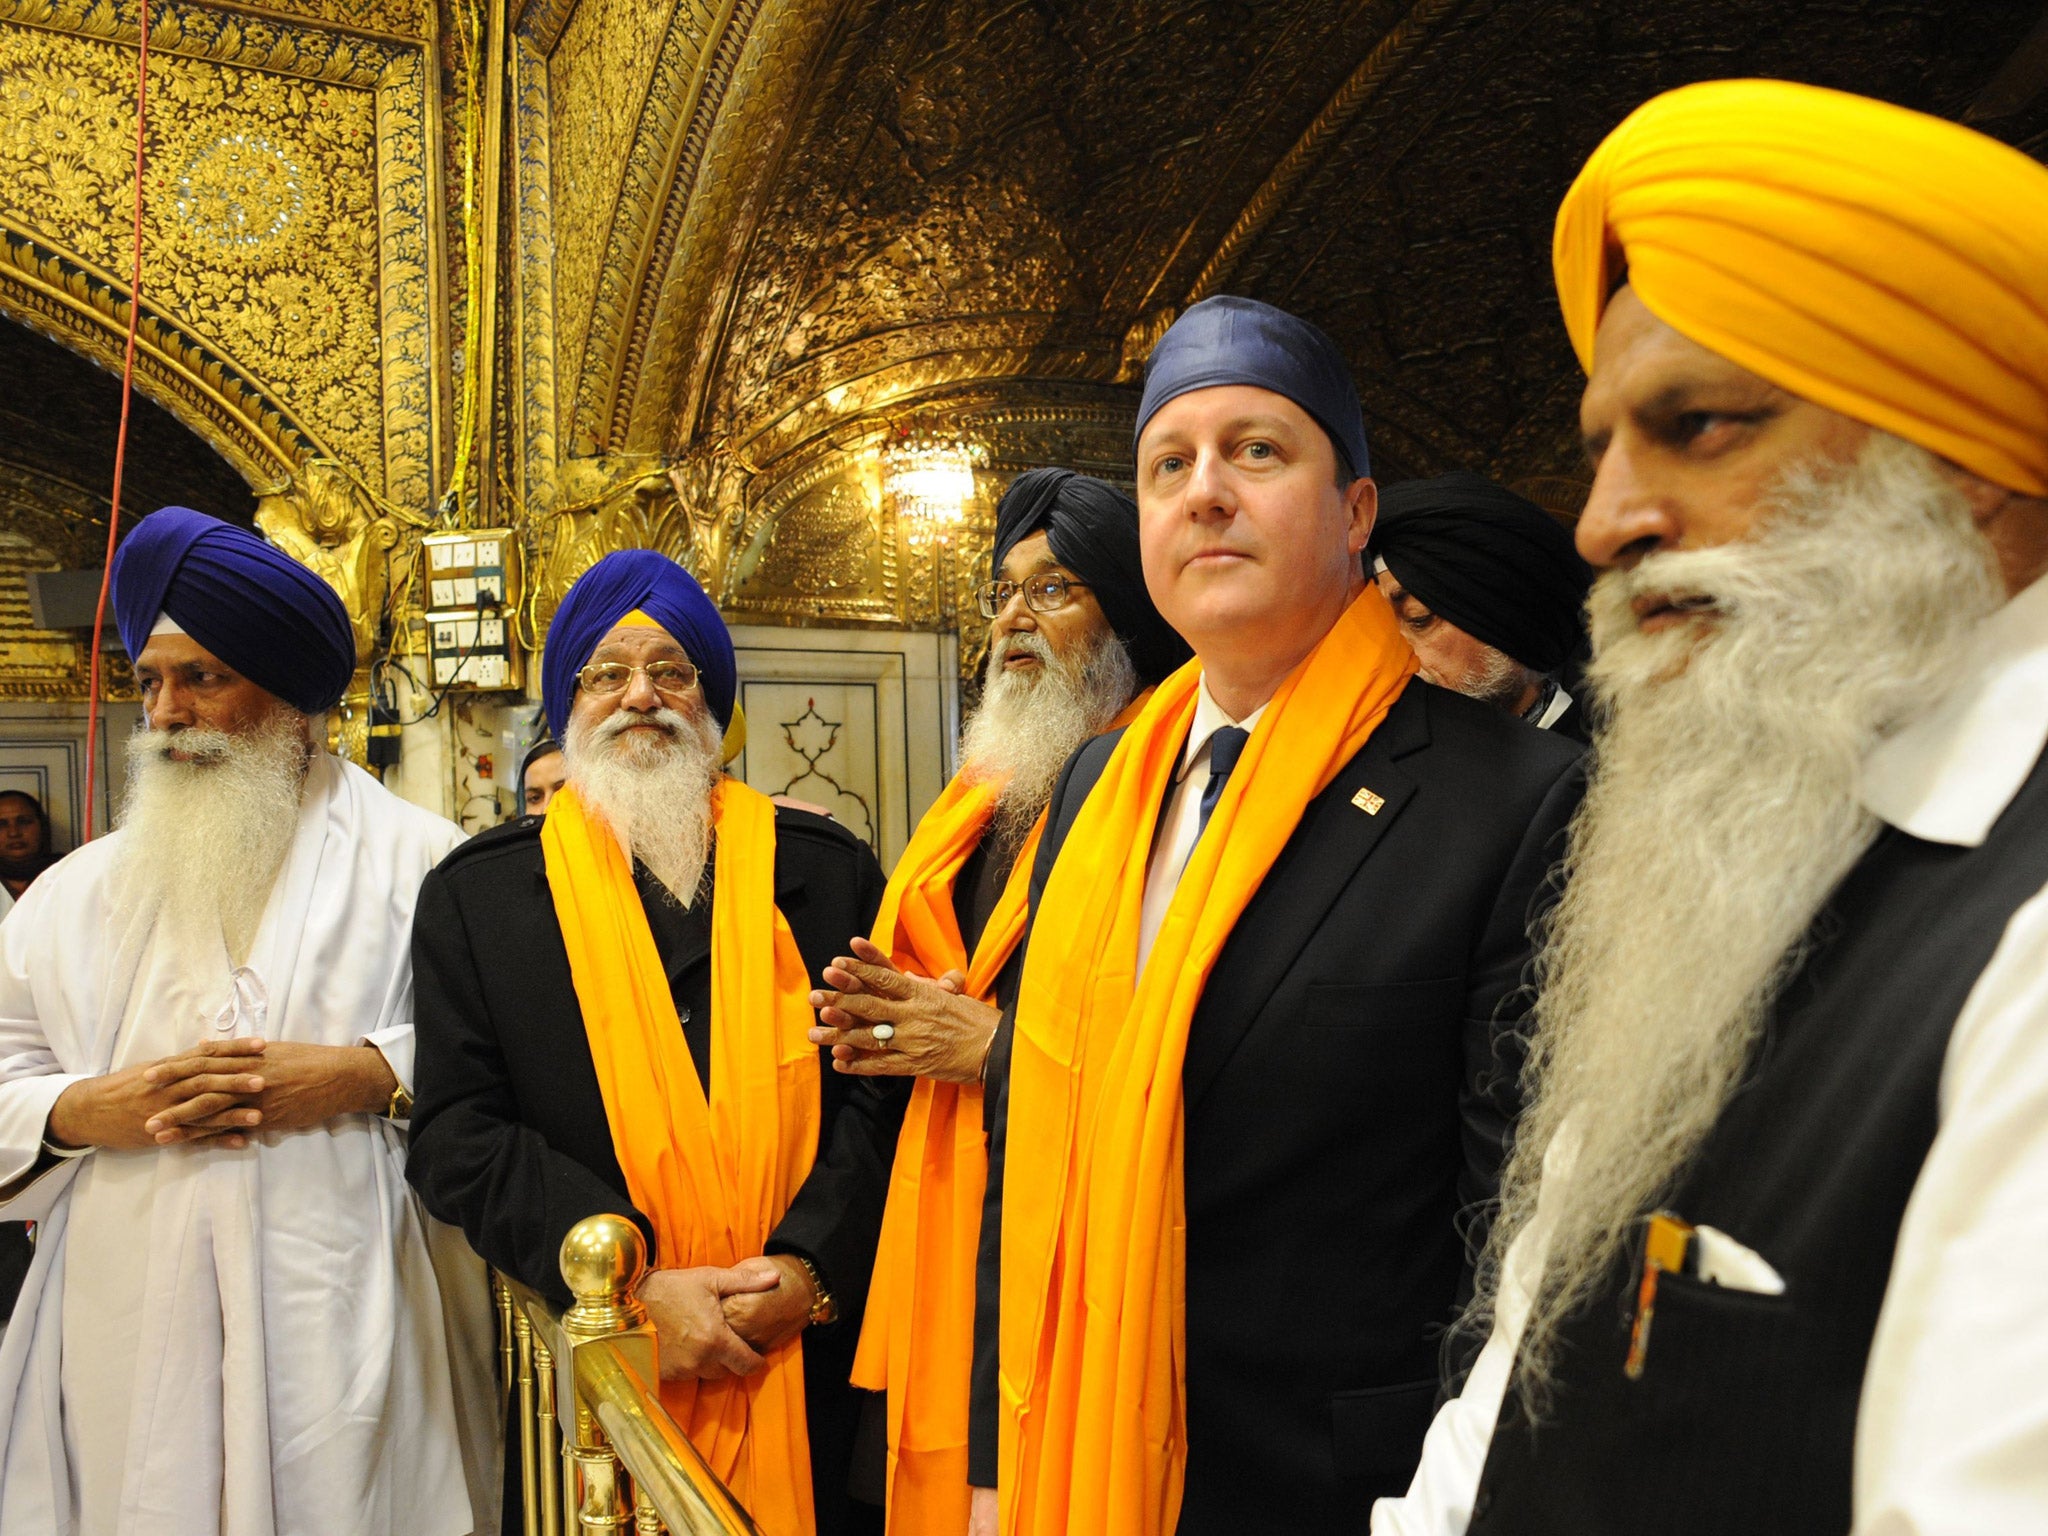 Prime Minister David Cameron is shown around the Golden Temple